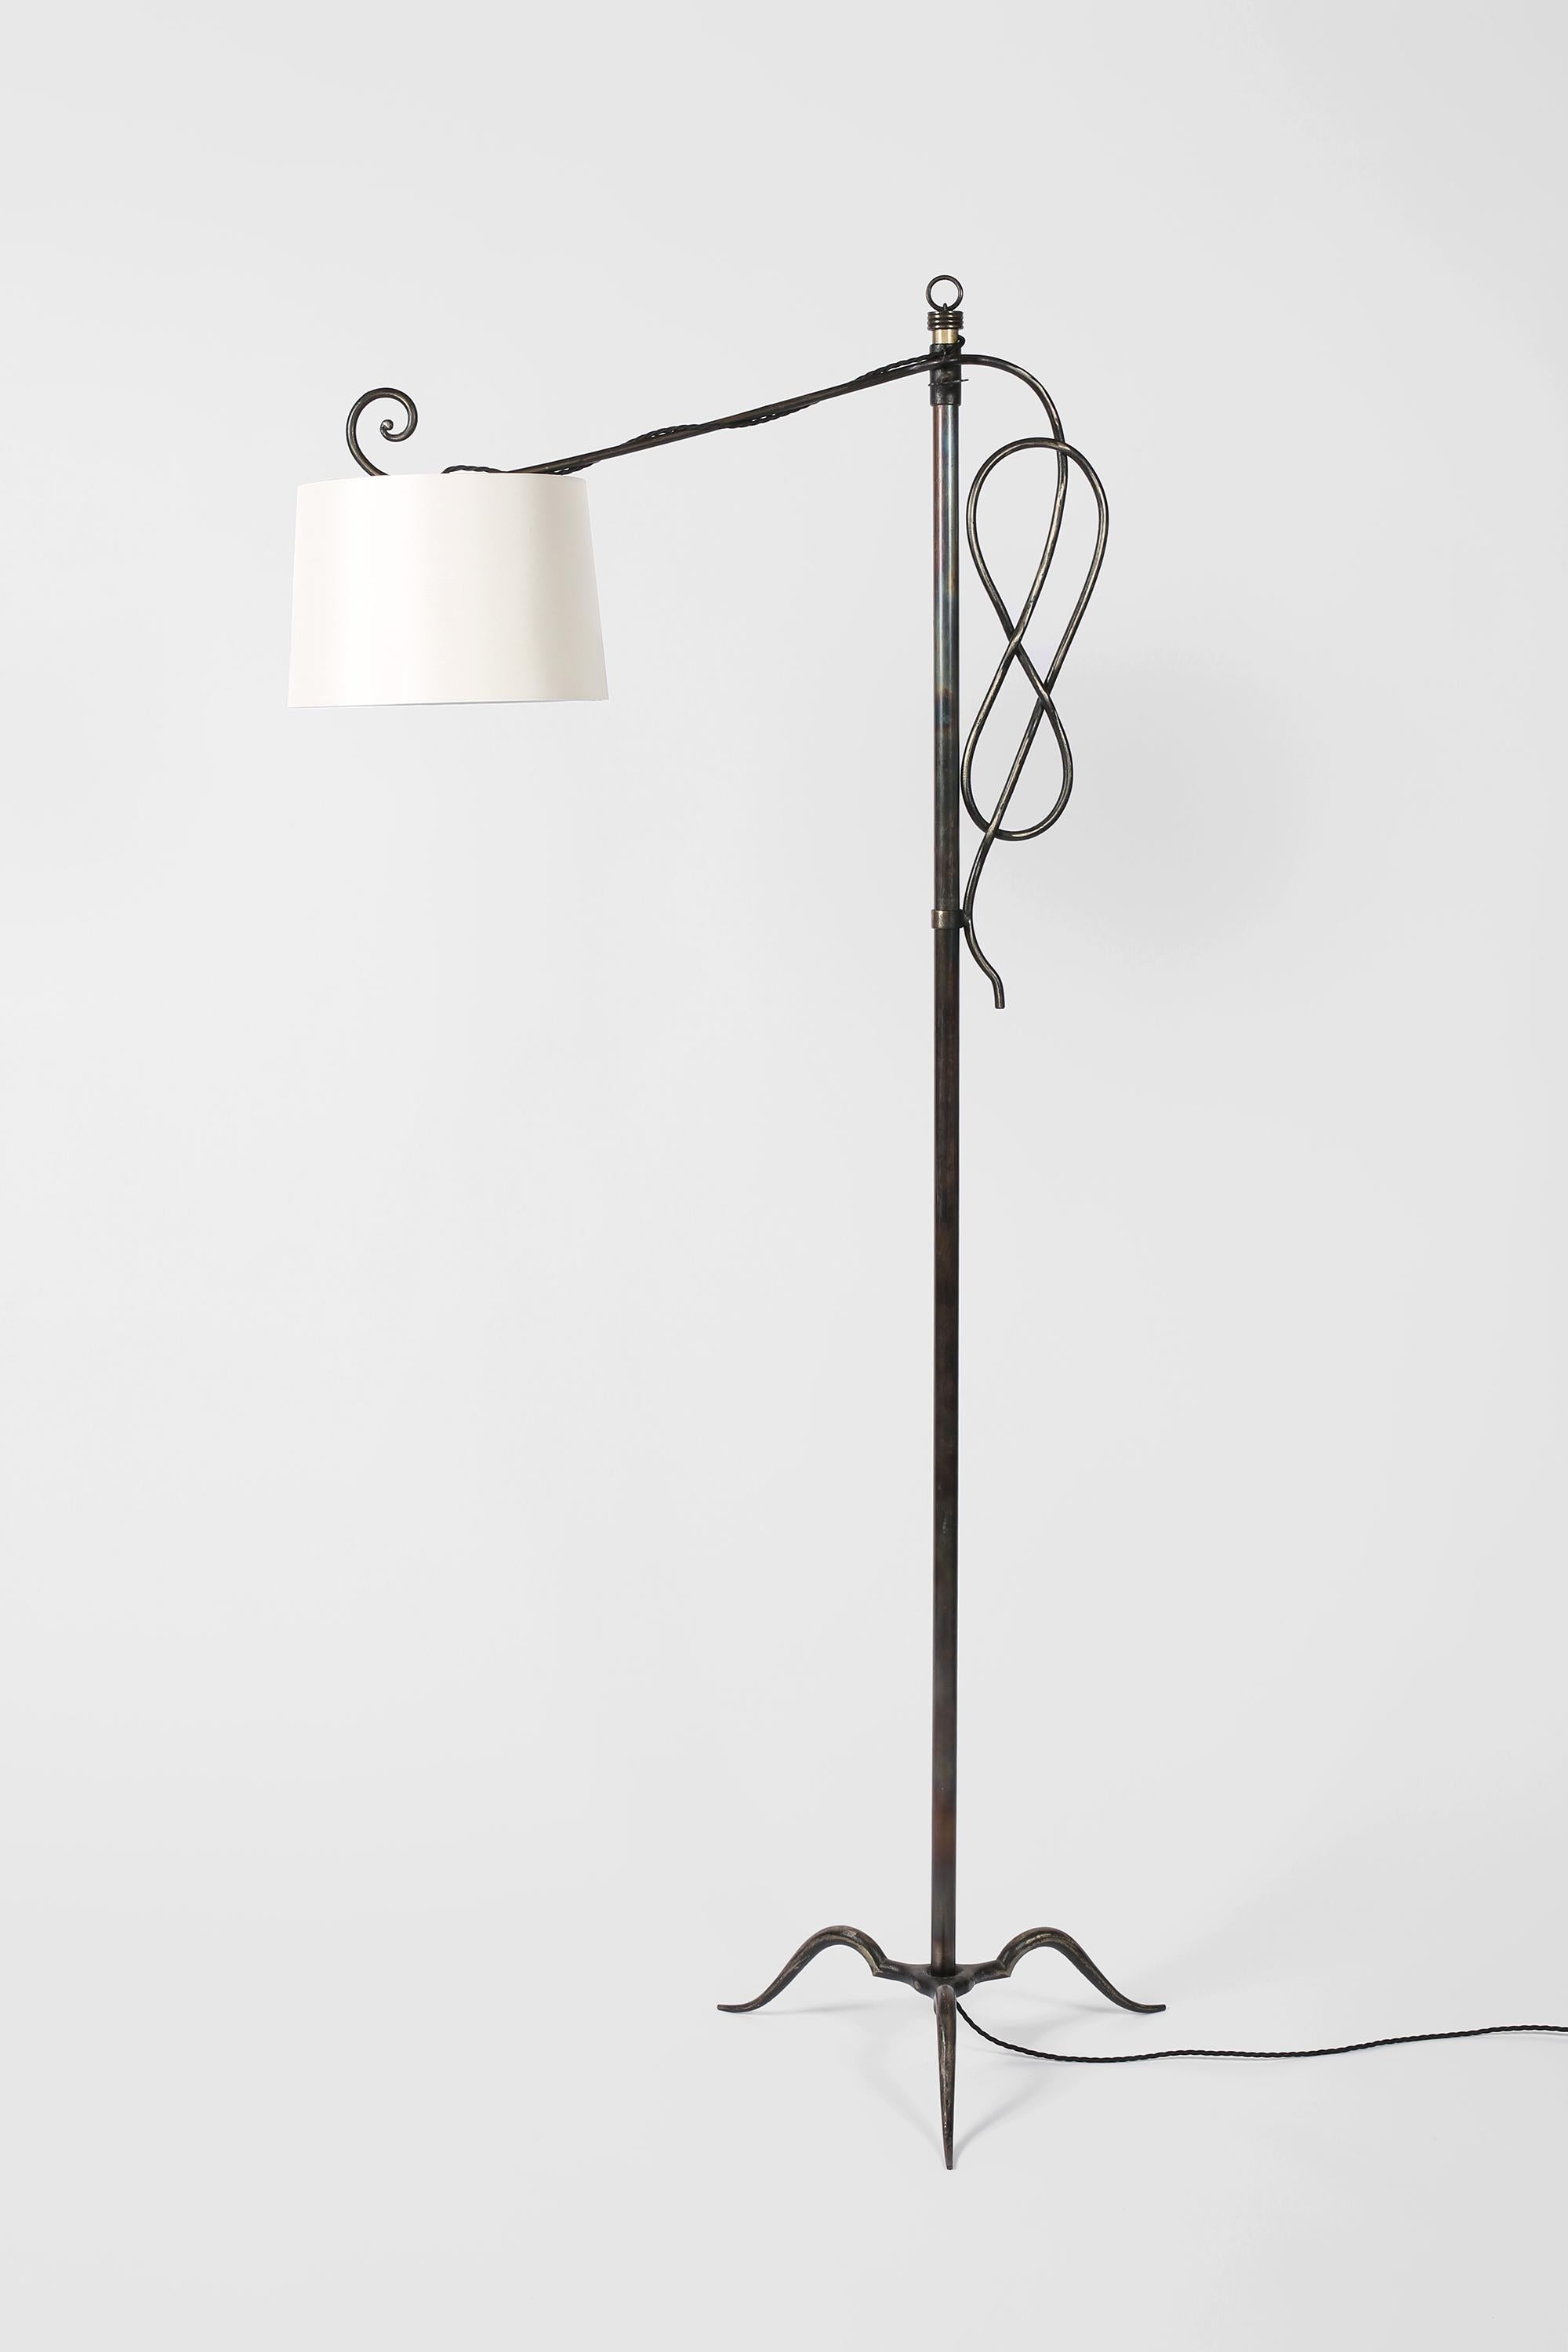 An Art Deco forged iron floor lamp by Michel Zadounaïsky. Featuring a scrolling and knotted height adjustable arm upon a simple stem, with shapely tripod base and decorative ring finial. French, c. 1930s. Supplied with an off-white dupion silk shade.